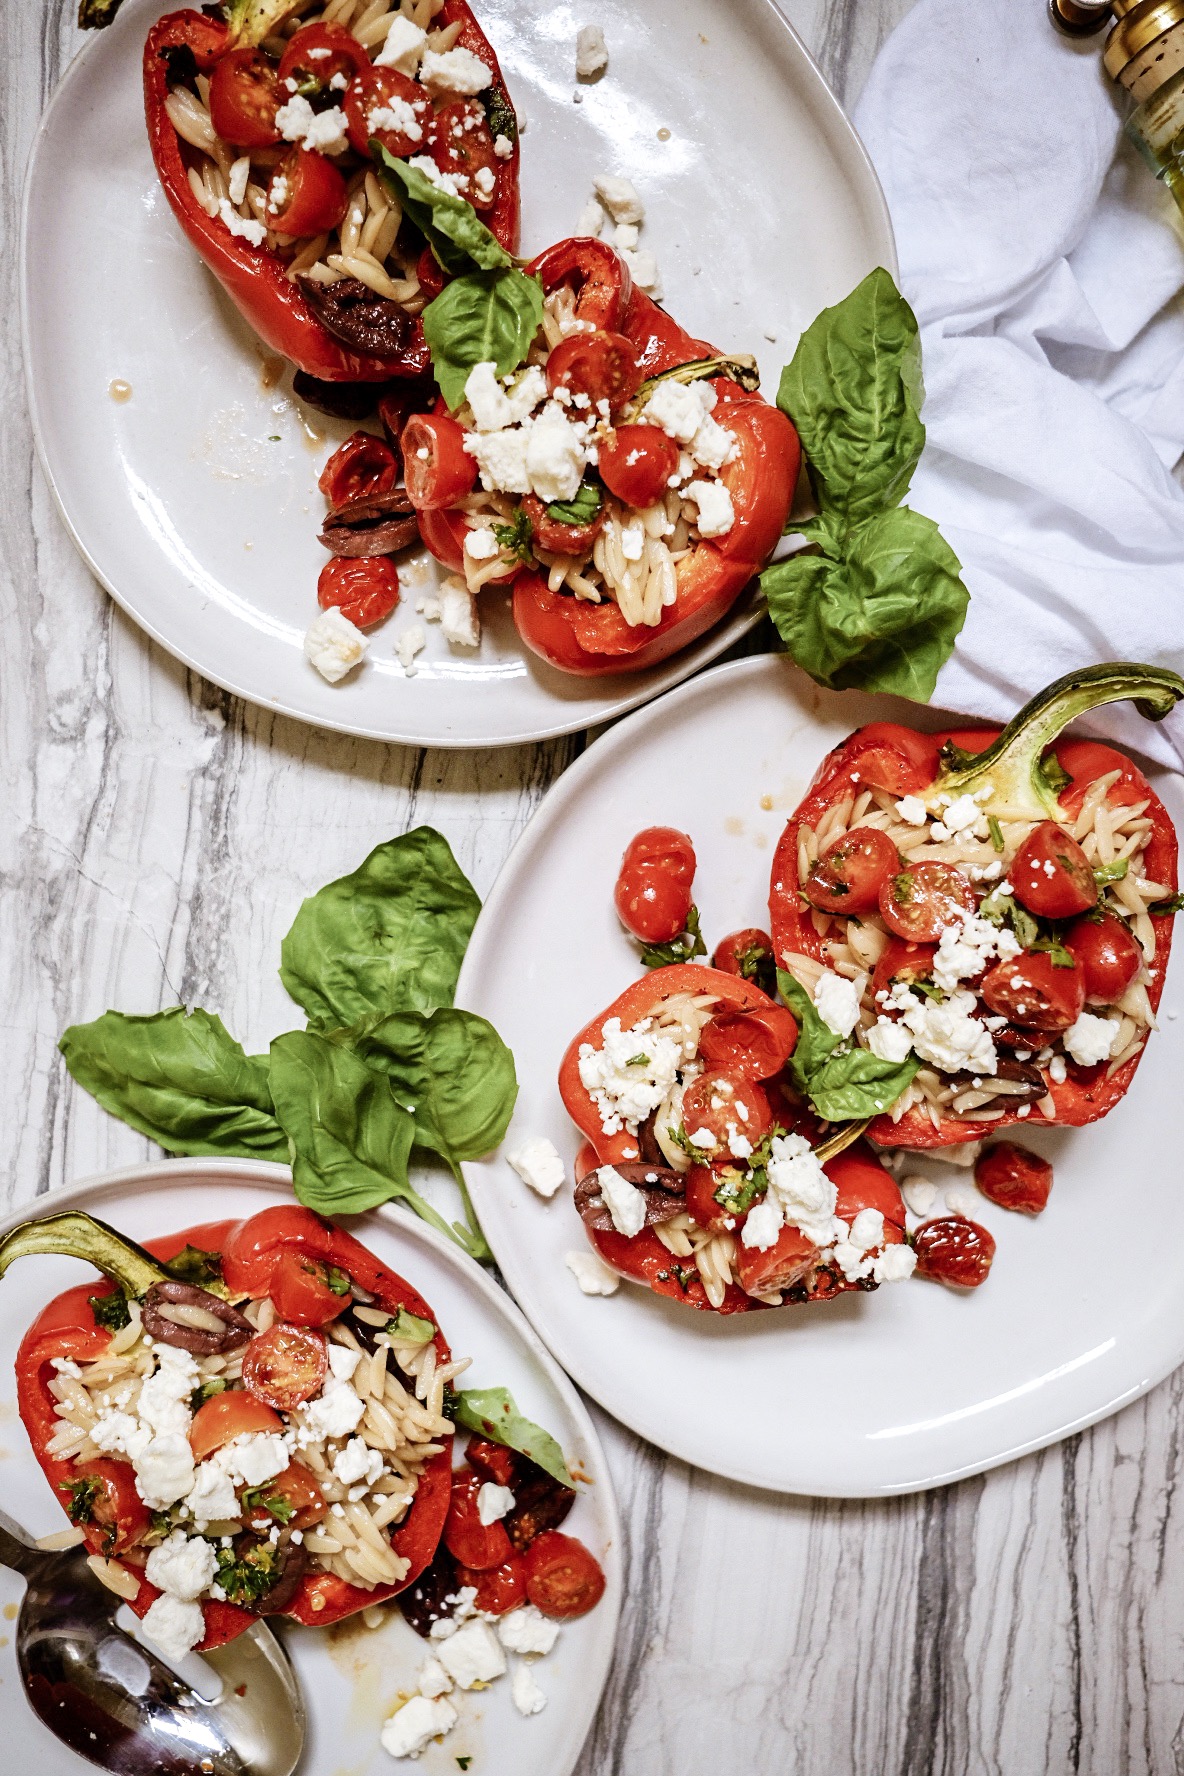 Lifestyle Blogger Jenny Meassick from Chocolate & Lace shares her recipe for Roasted Stuffed Peppers.